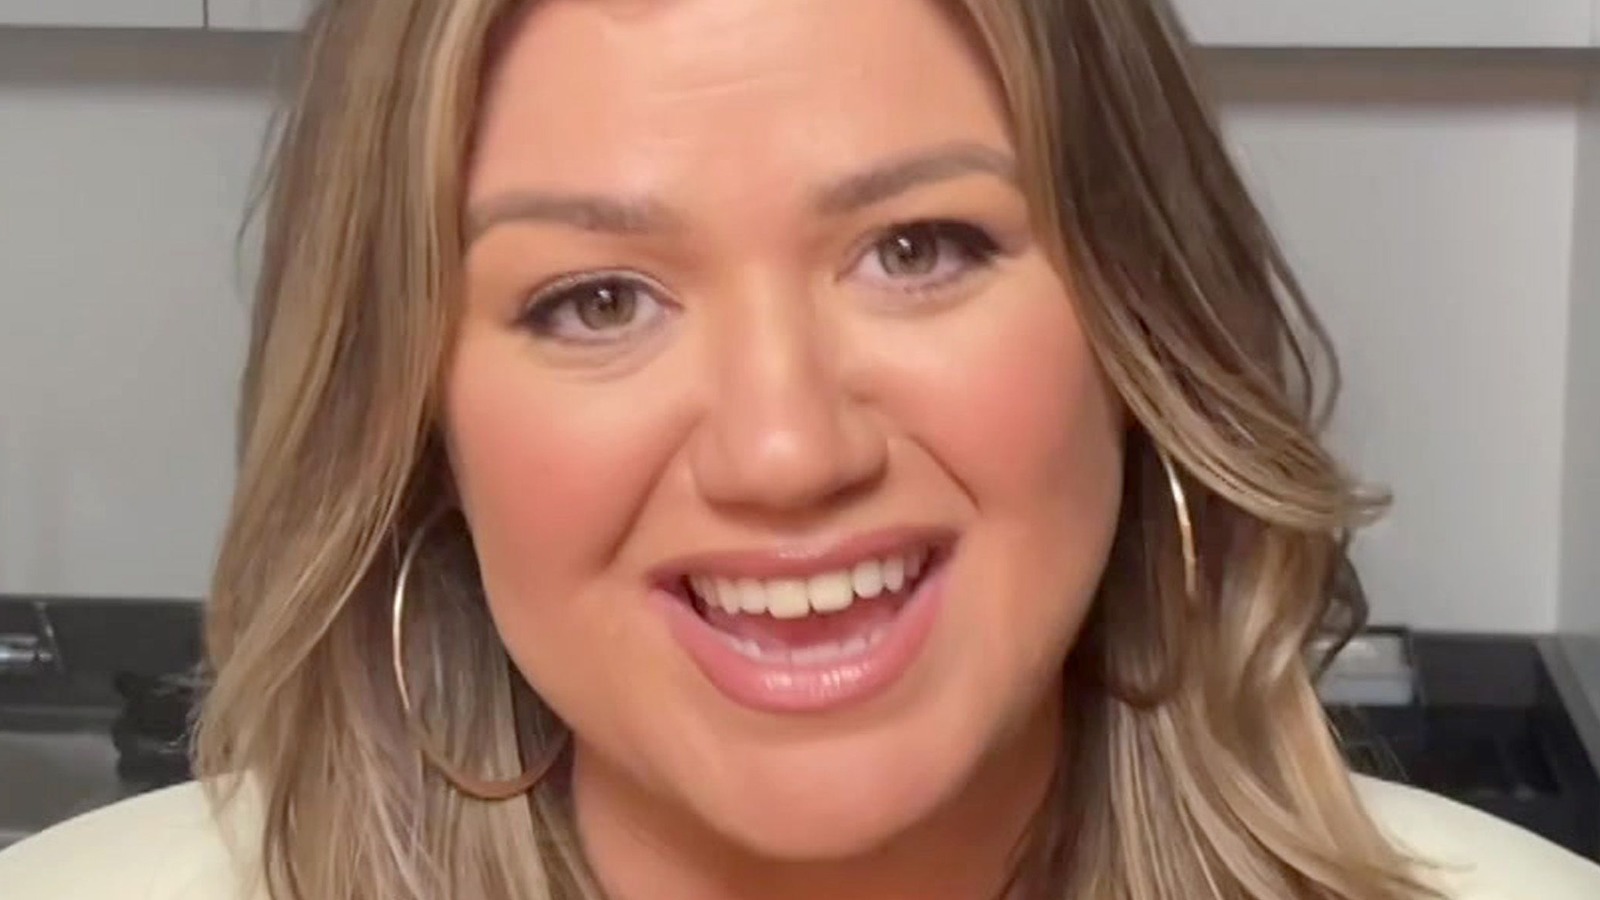 How Much Money Did Kelly Clarkson Lose When Selling Her Home She Shared With Her Ex?